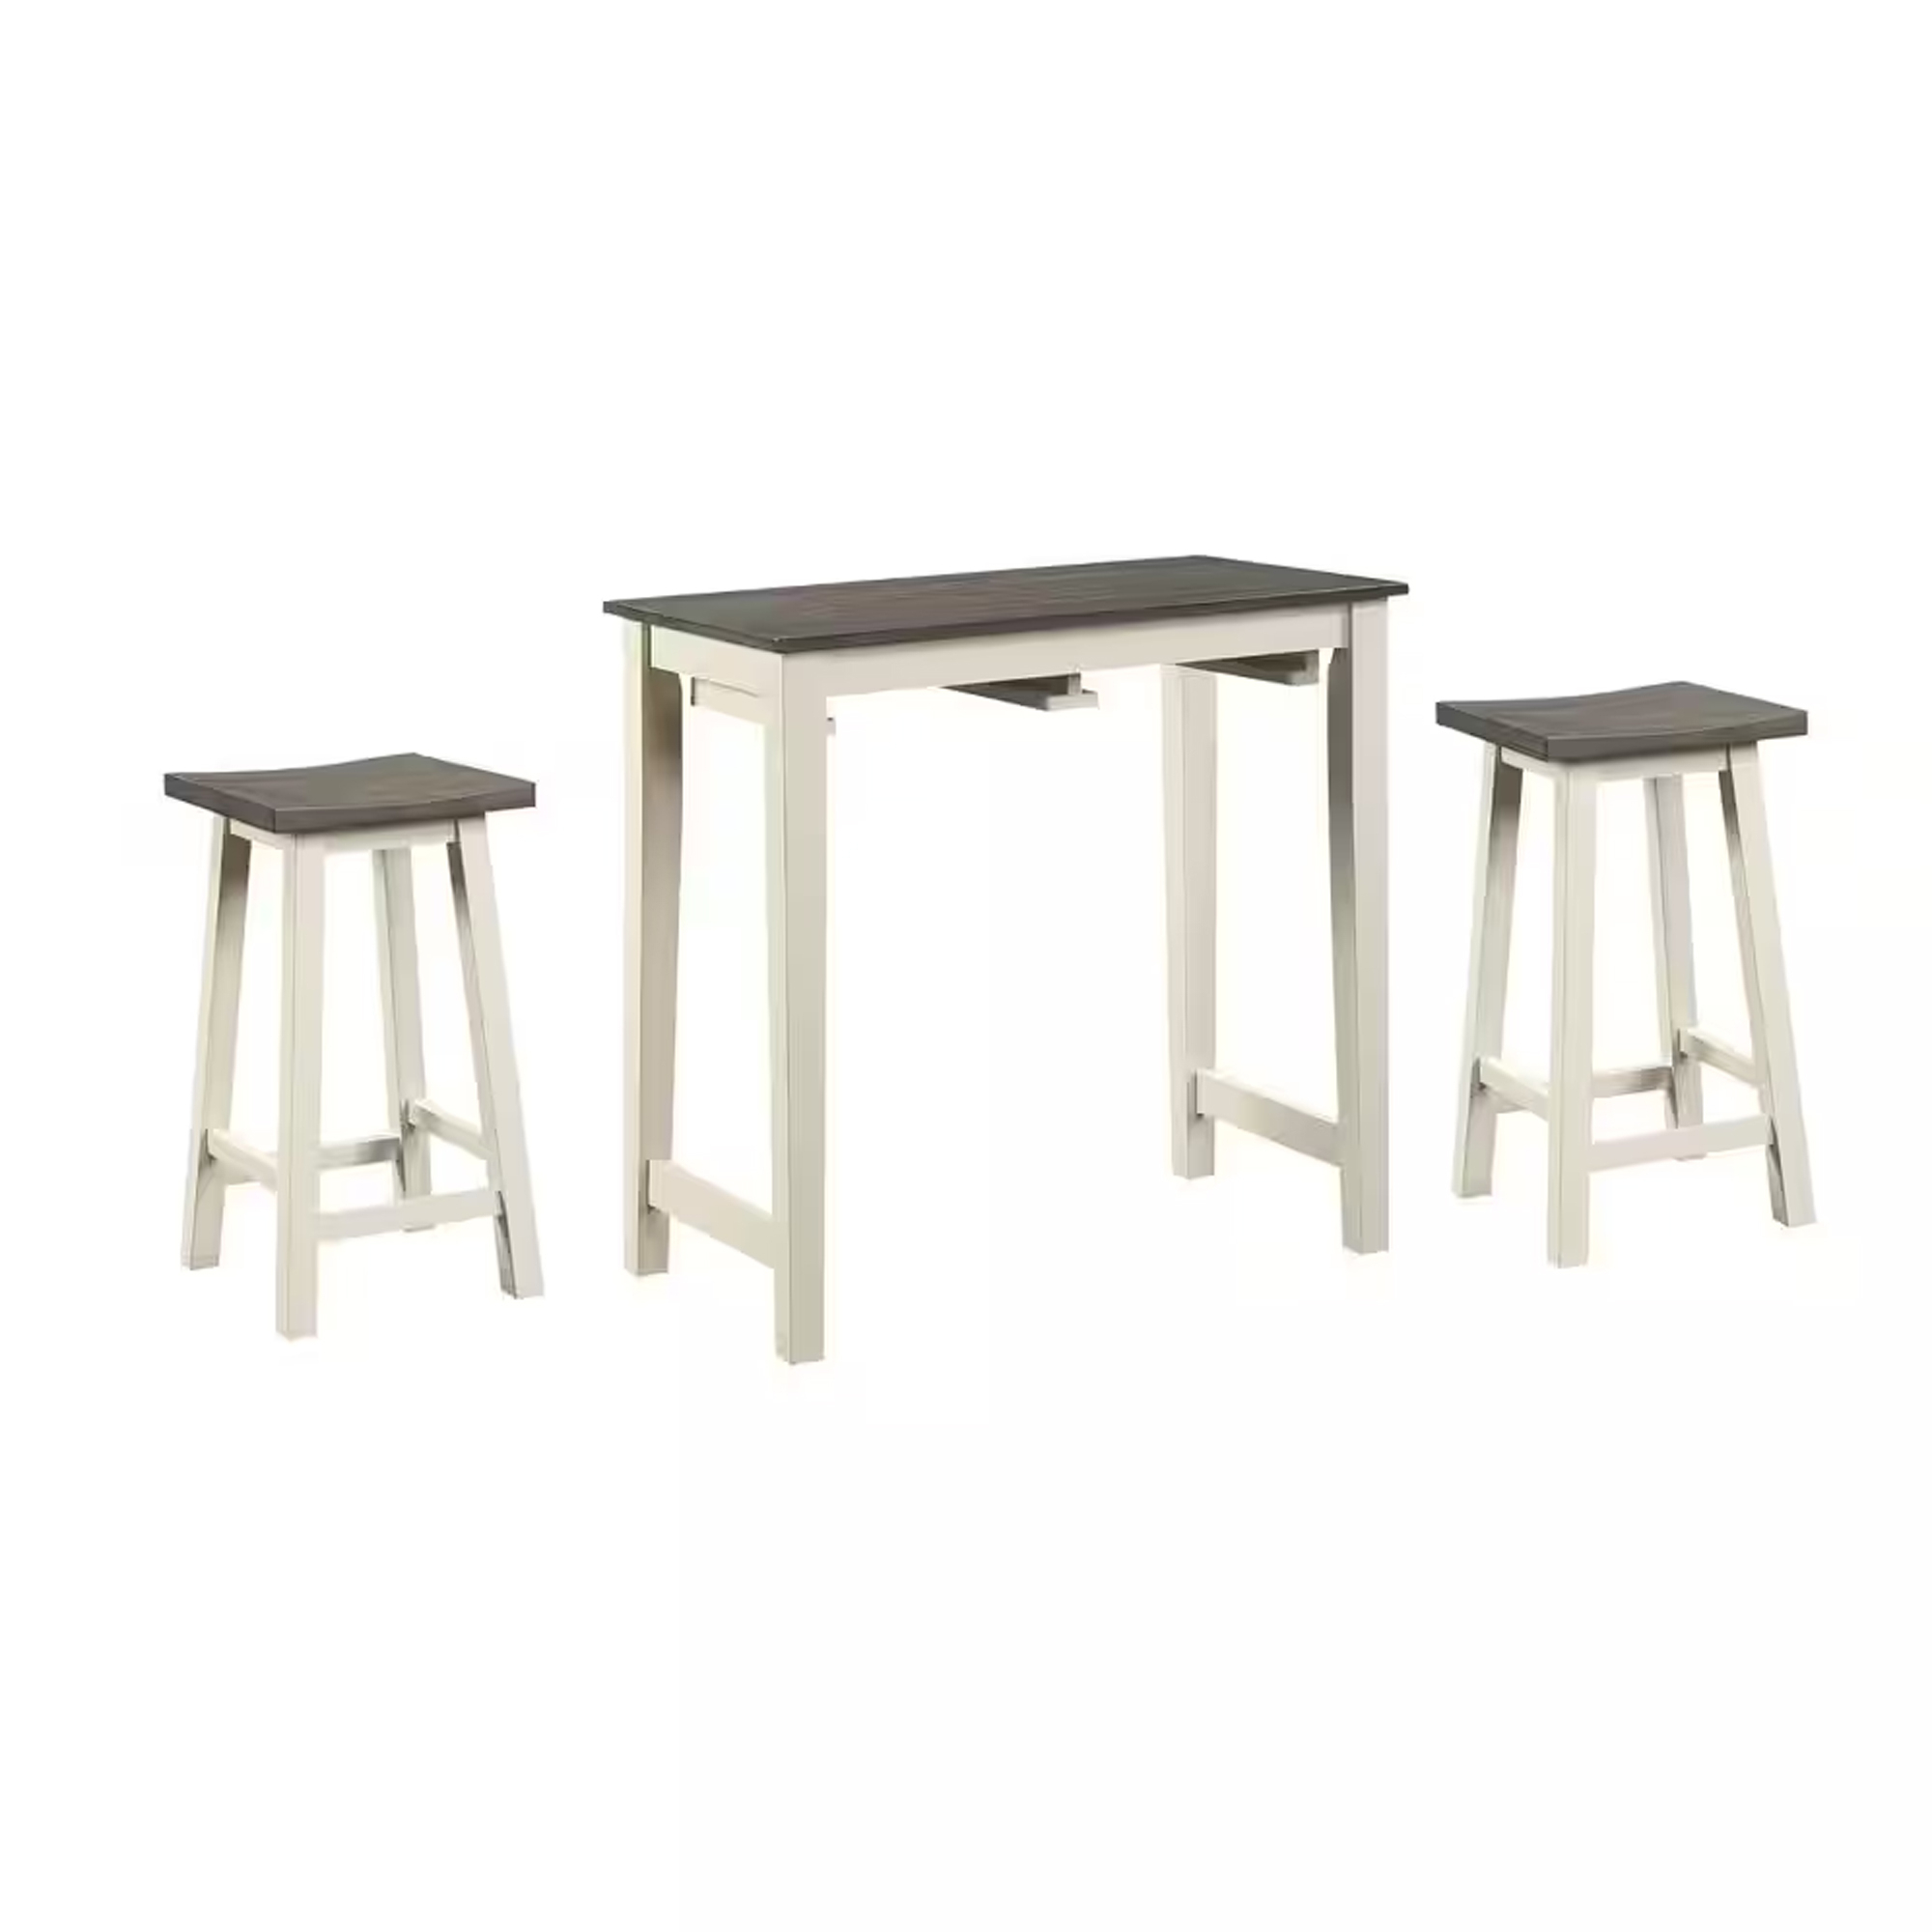 3 Piece Set Solid Wood Counter Dining Table With 2 Stools, White, Gray- Saltoro Sherpi